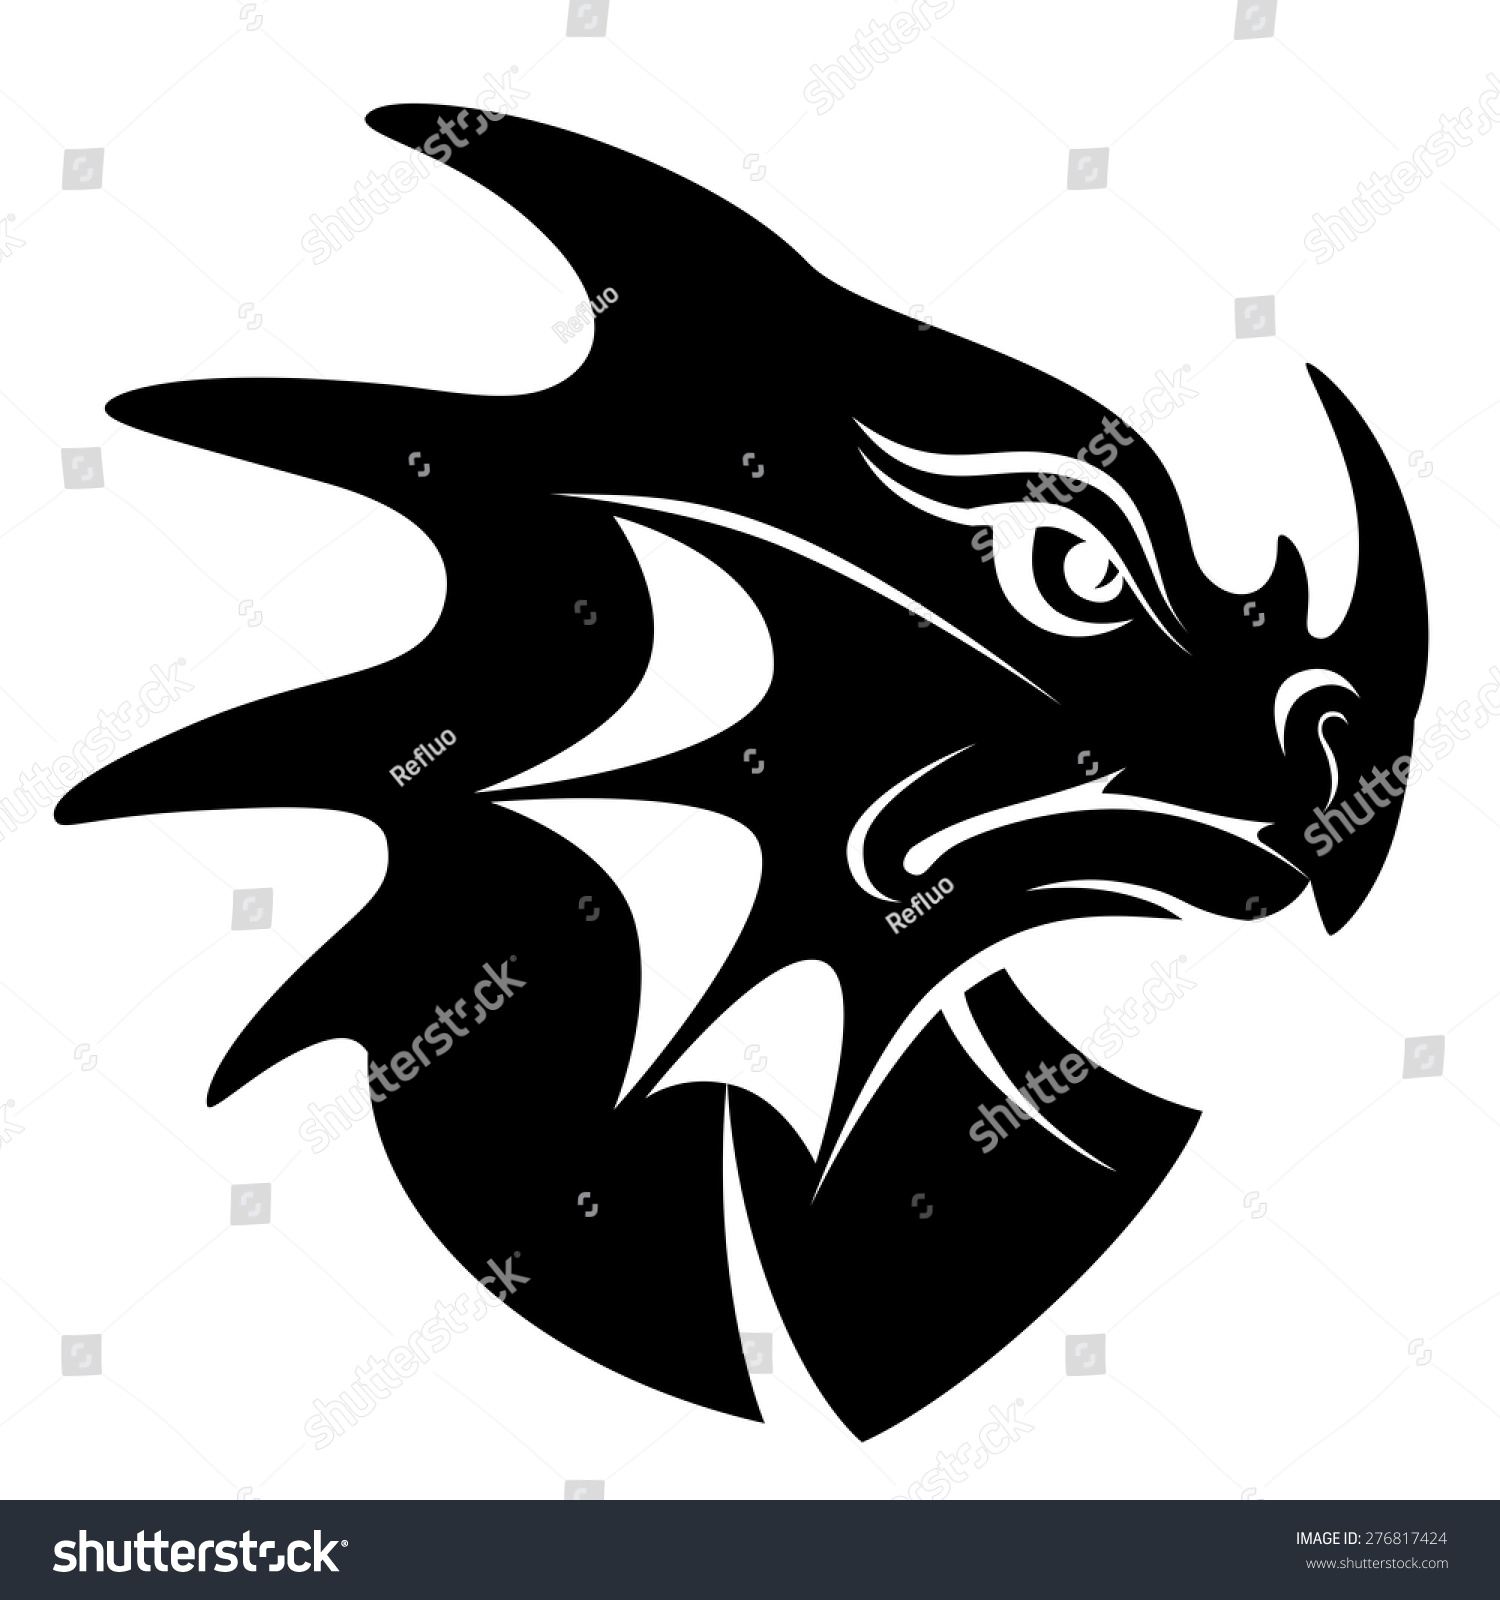 Stylized Head Of Dragon Isolated On White Background. Stock Vector ...